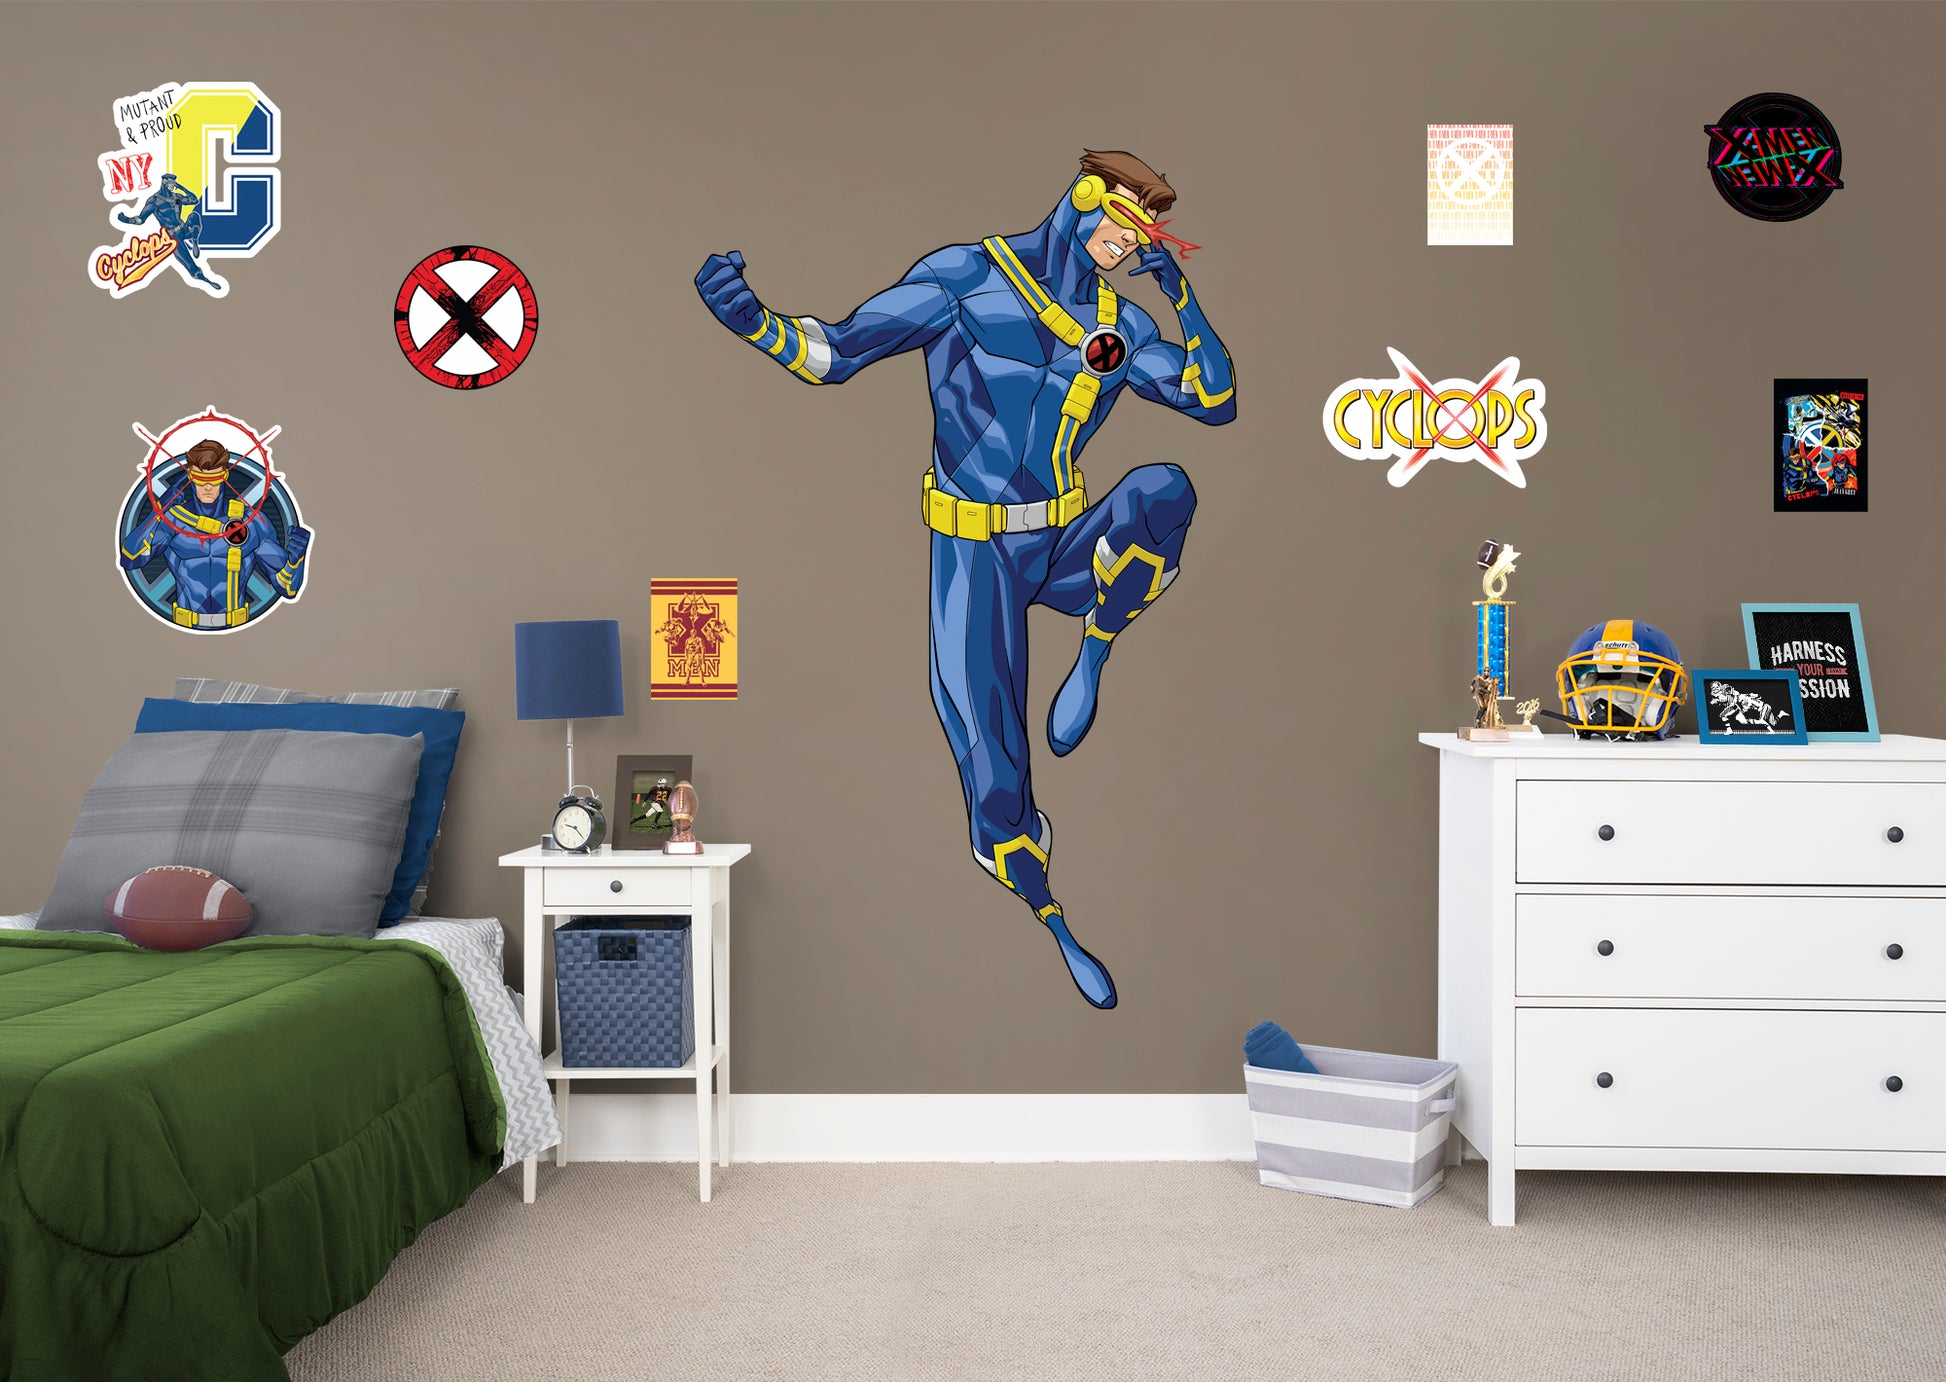 Life-Size Character + 8 Decals (49"W x 77"H)